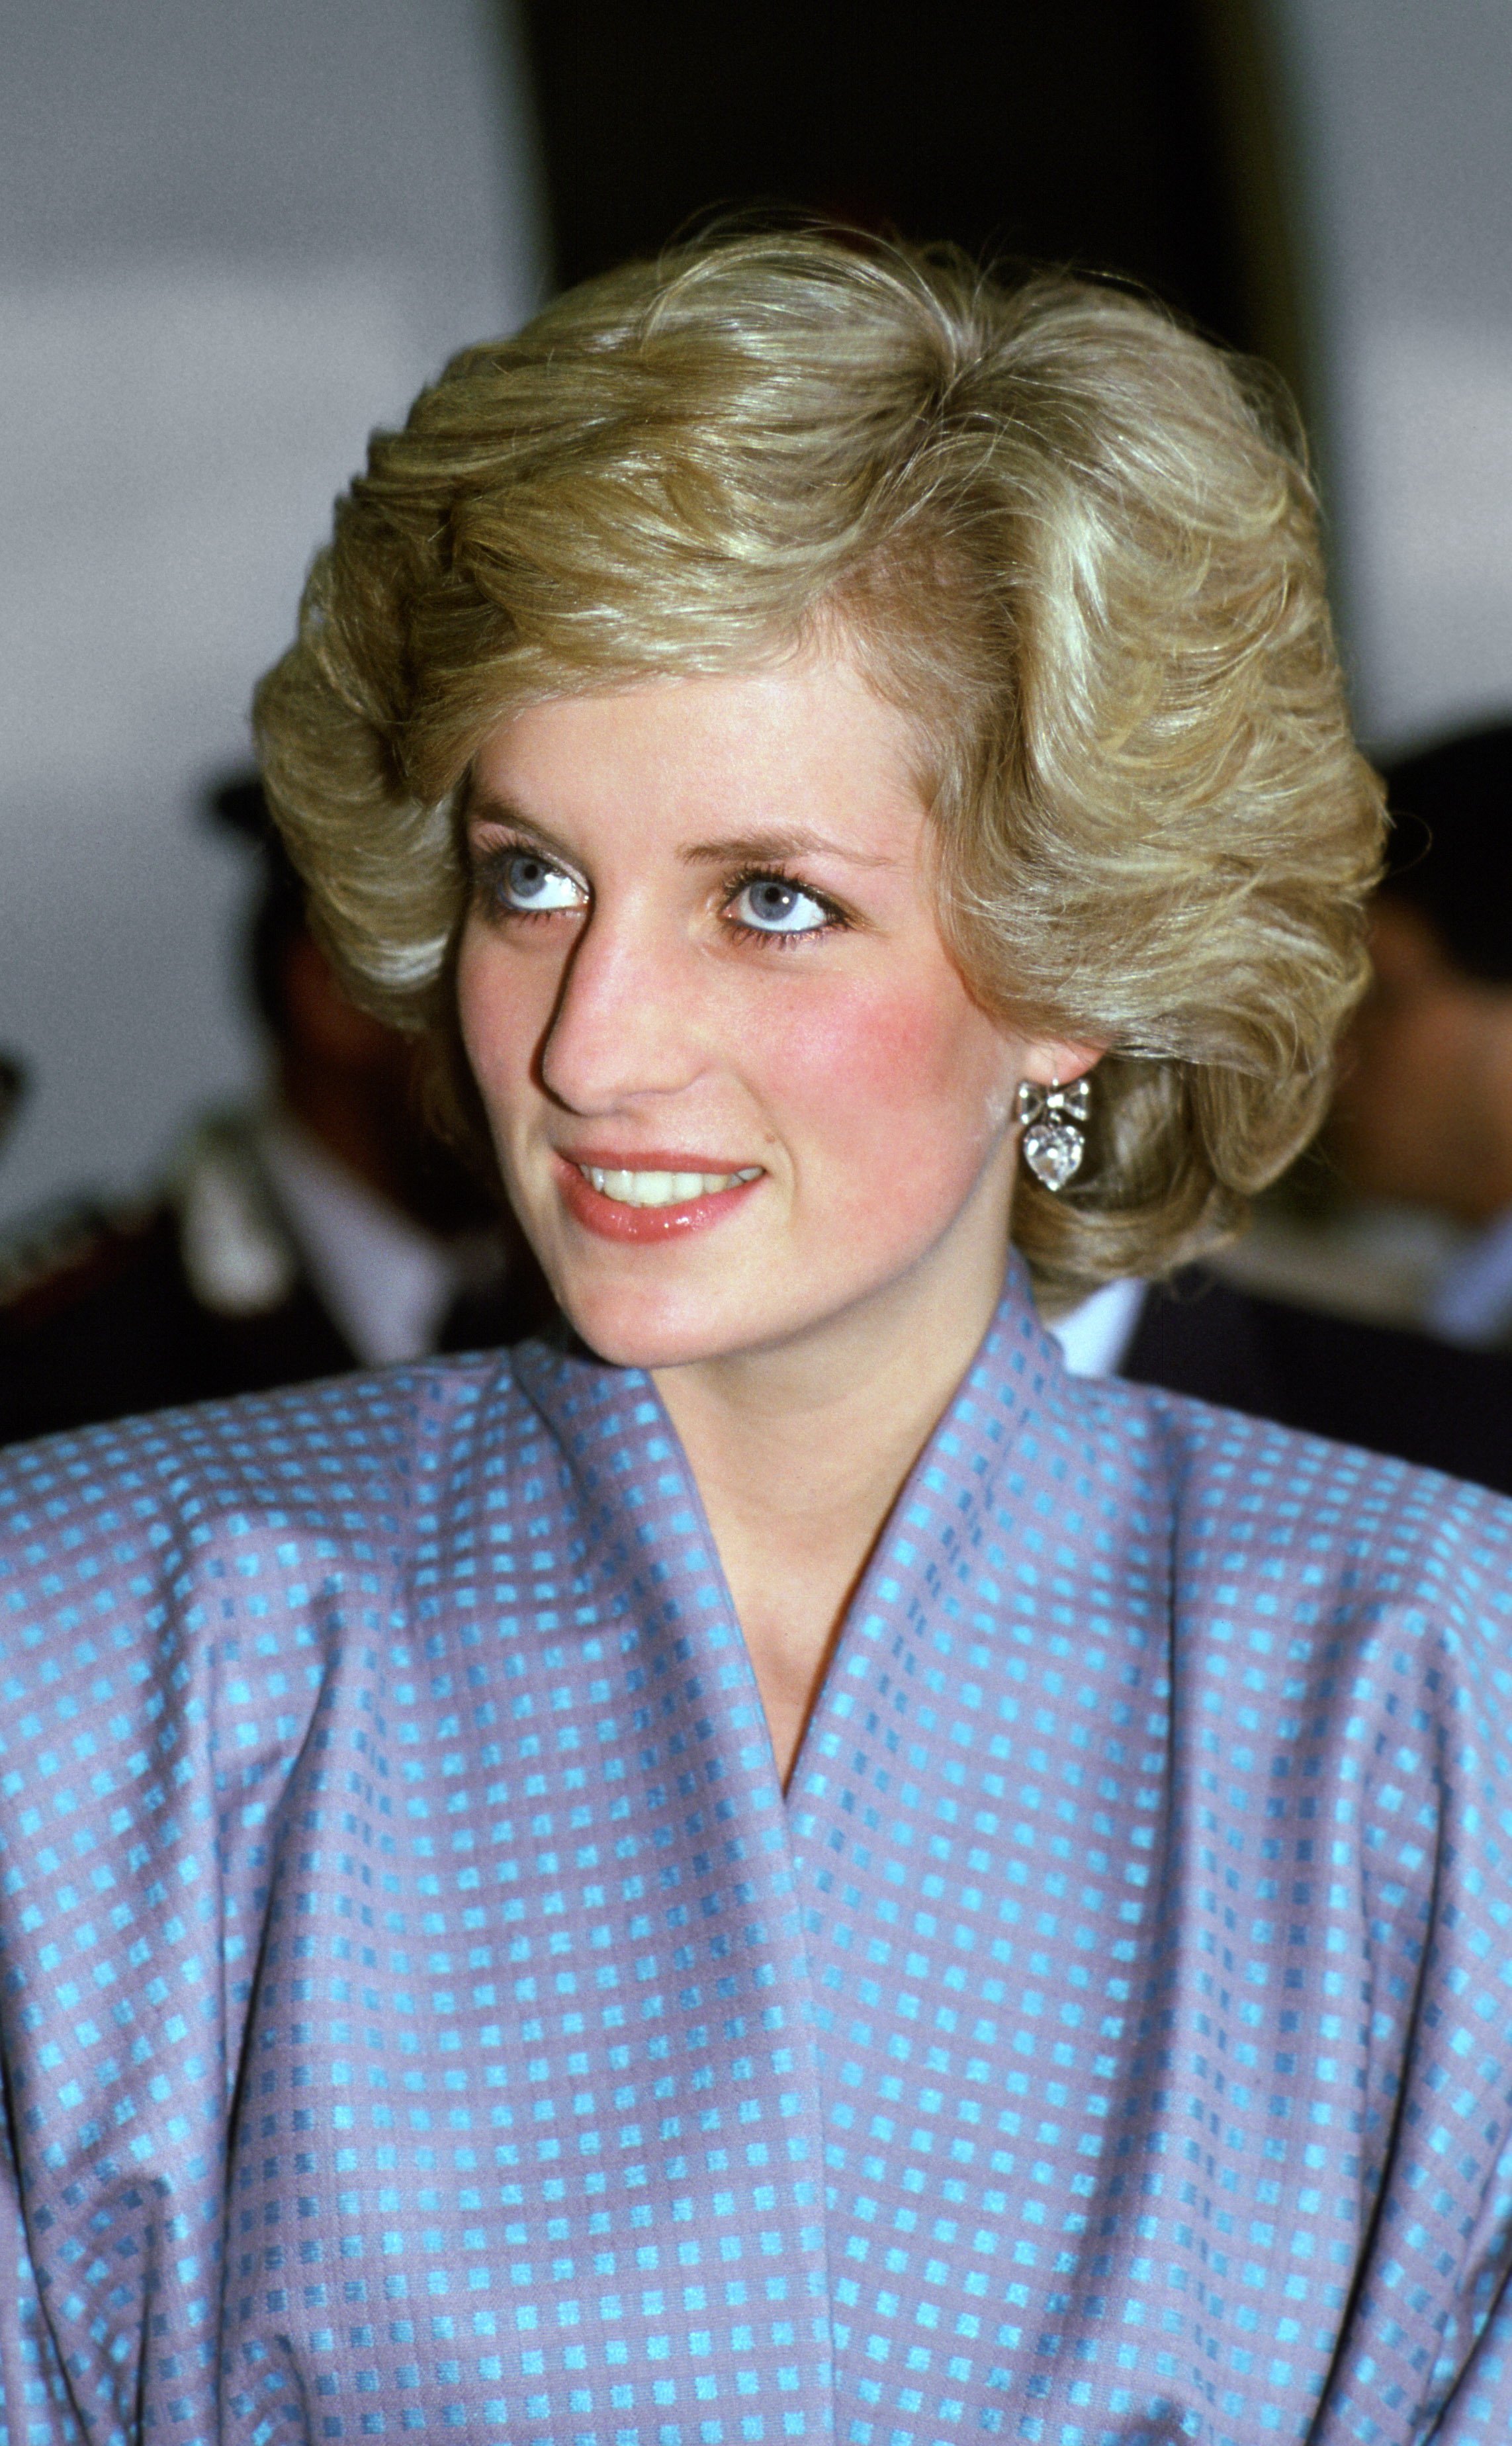 Fans Defend 'Classy' Diana after Pic of How She Would Look Today ...